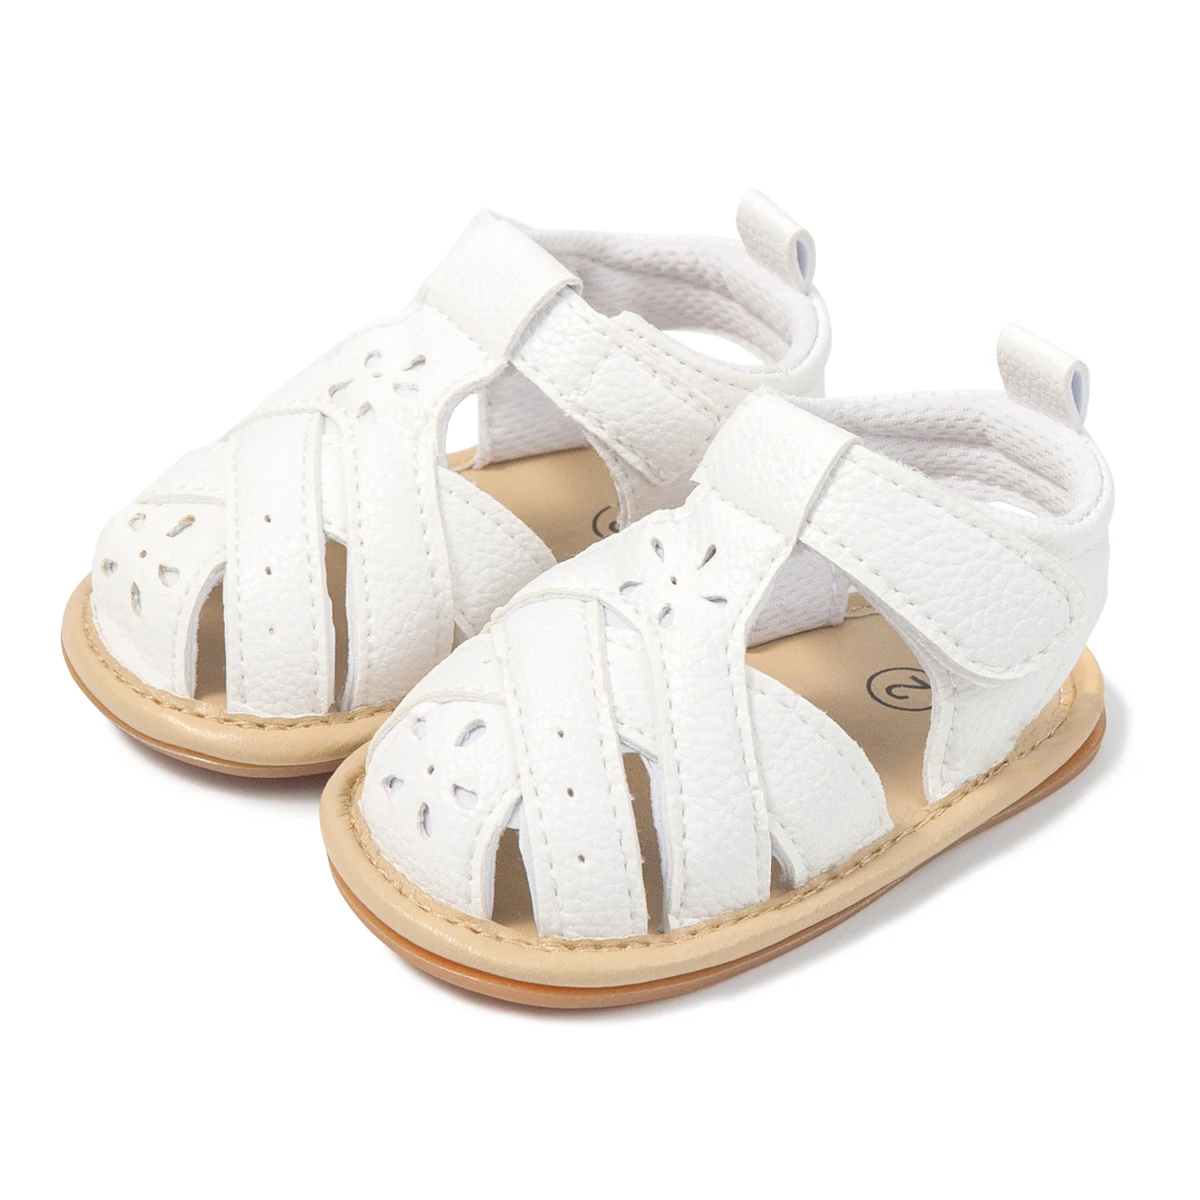 High Quality  outdoor infant baby  Girls and boys Summer Shoes  rubber soft sole  PU leather fabric  baby sandals